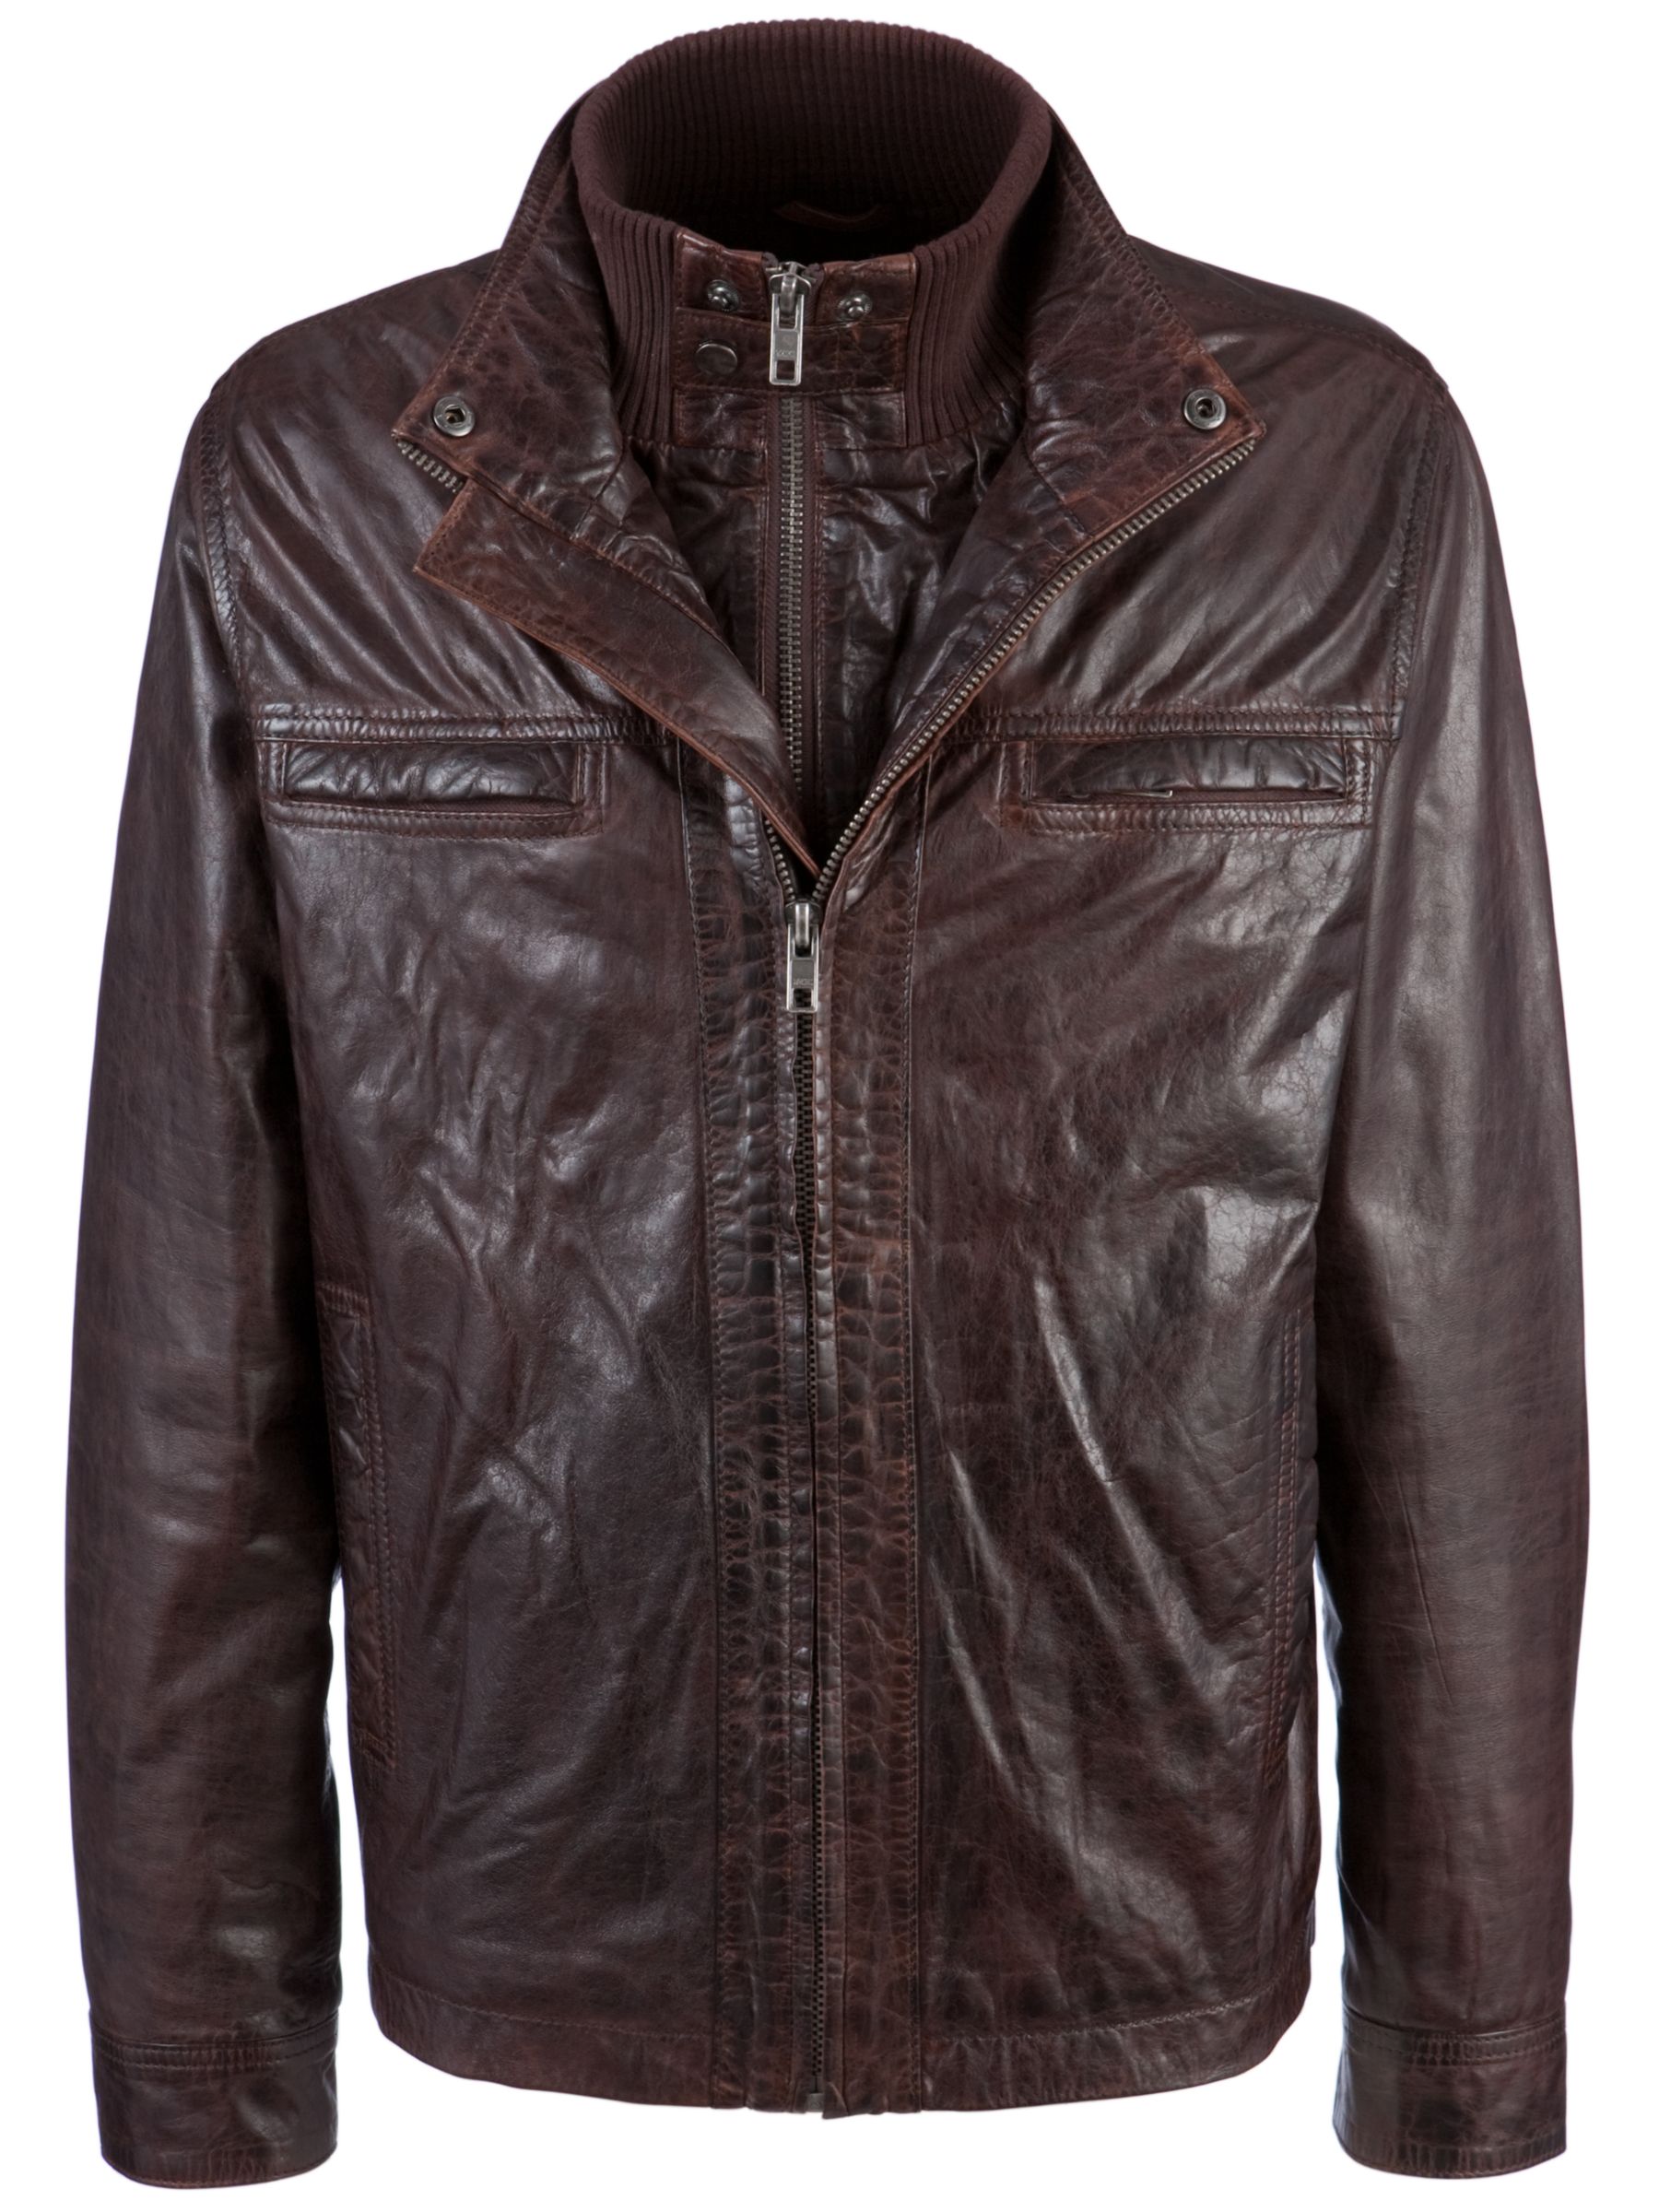 COLLECTION, John Lewis Men Double Collar 2 in 1 Leather Jacket, Brown at JohnLewis